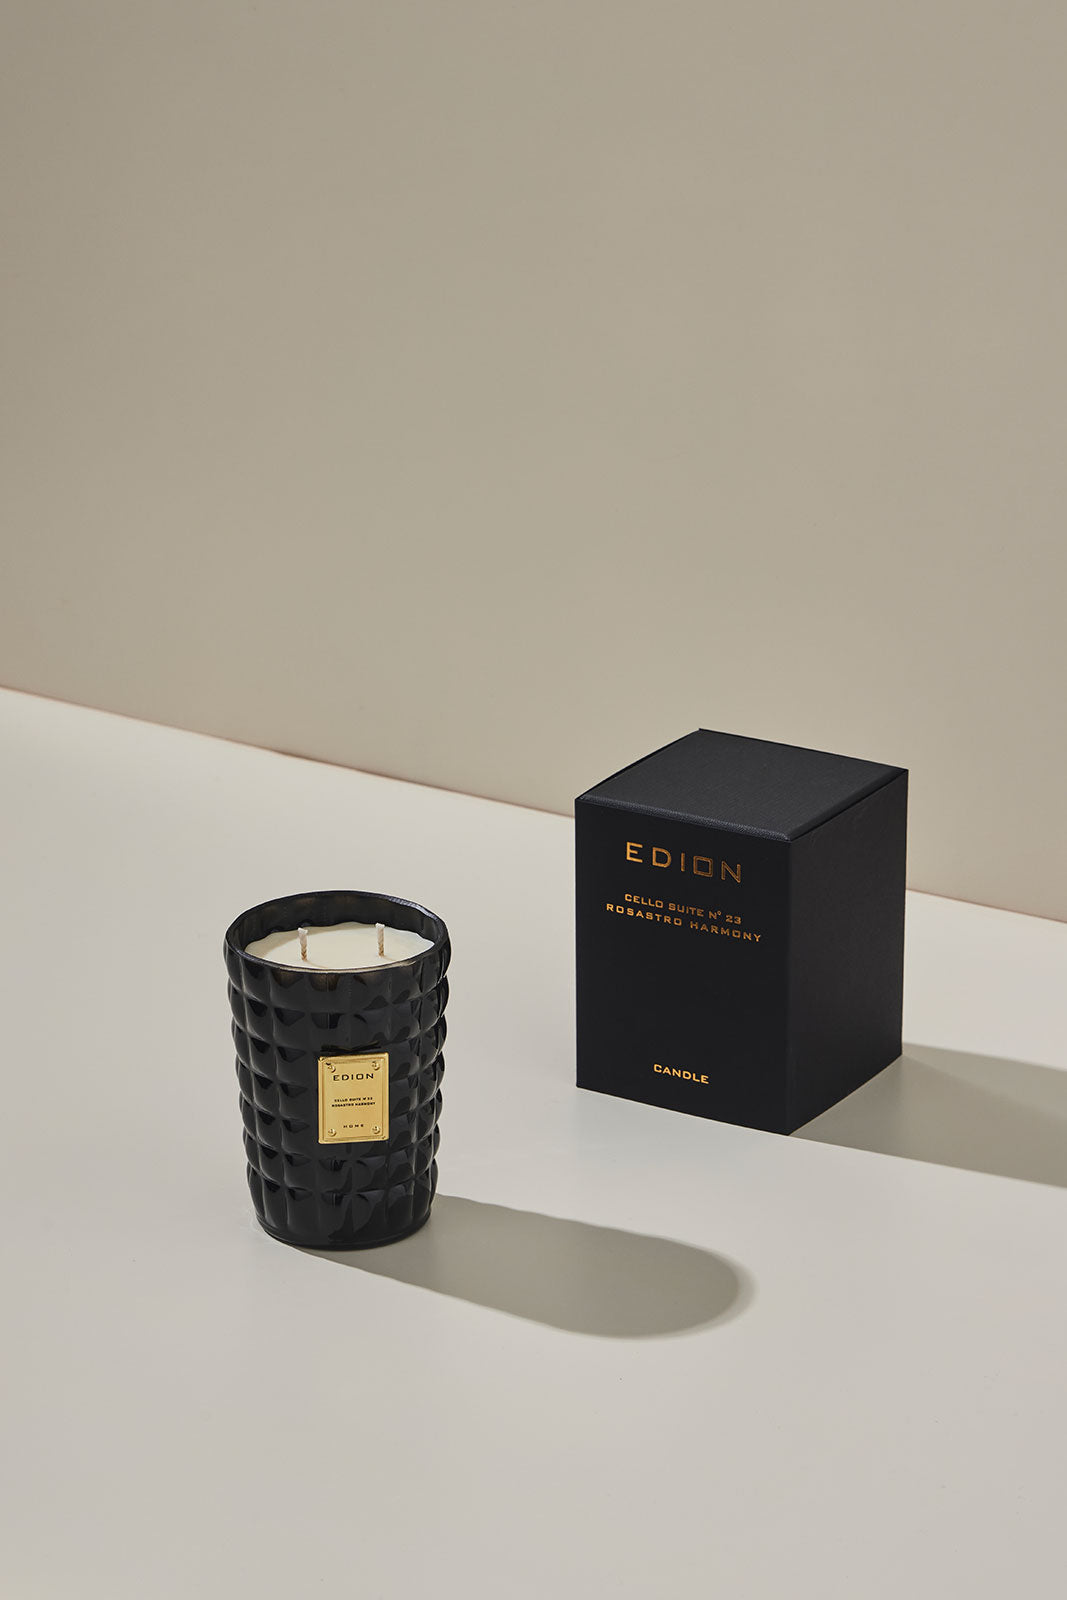 Luxury scented candle Cello suite n.23 Rosastro harmony